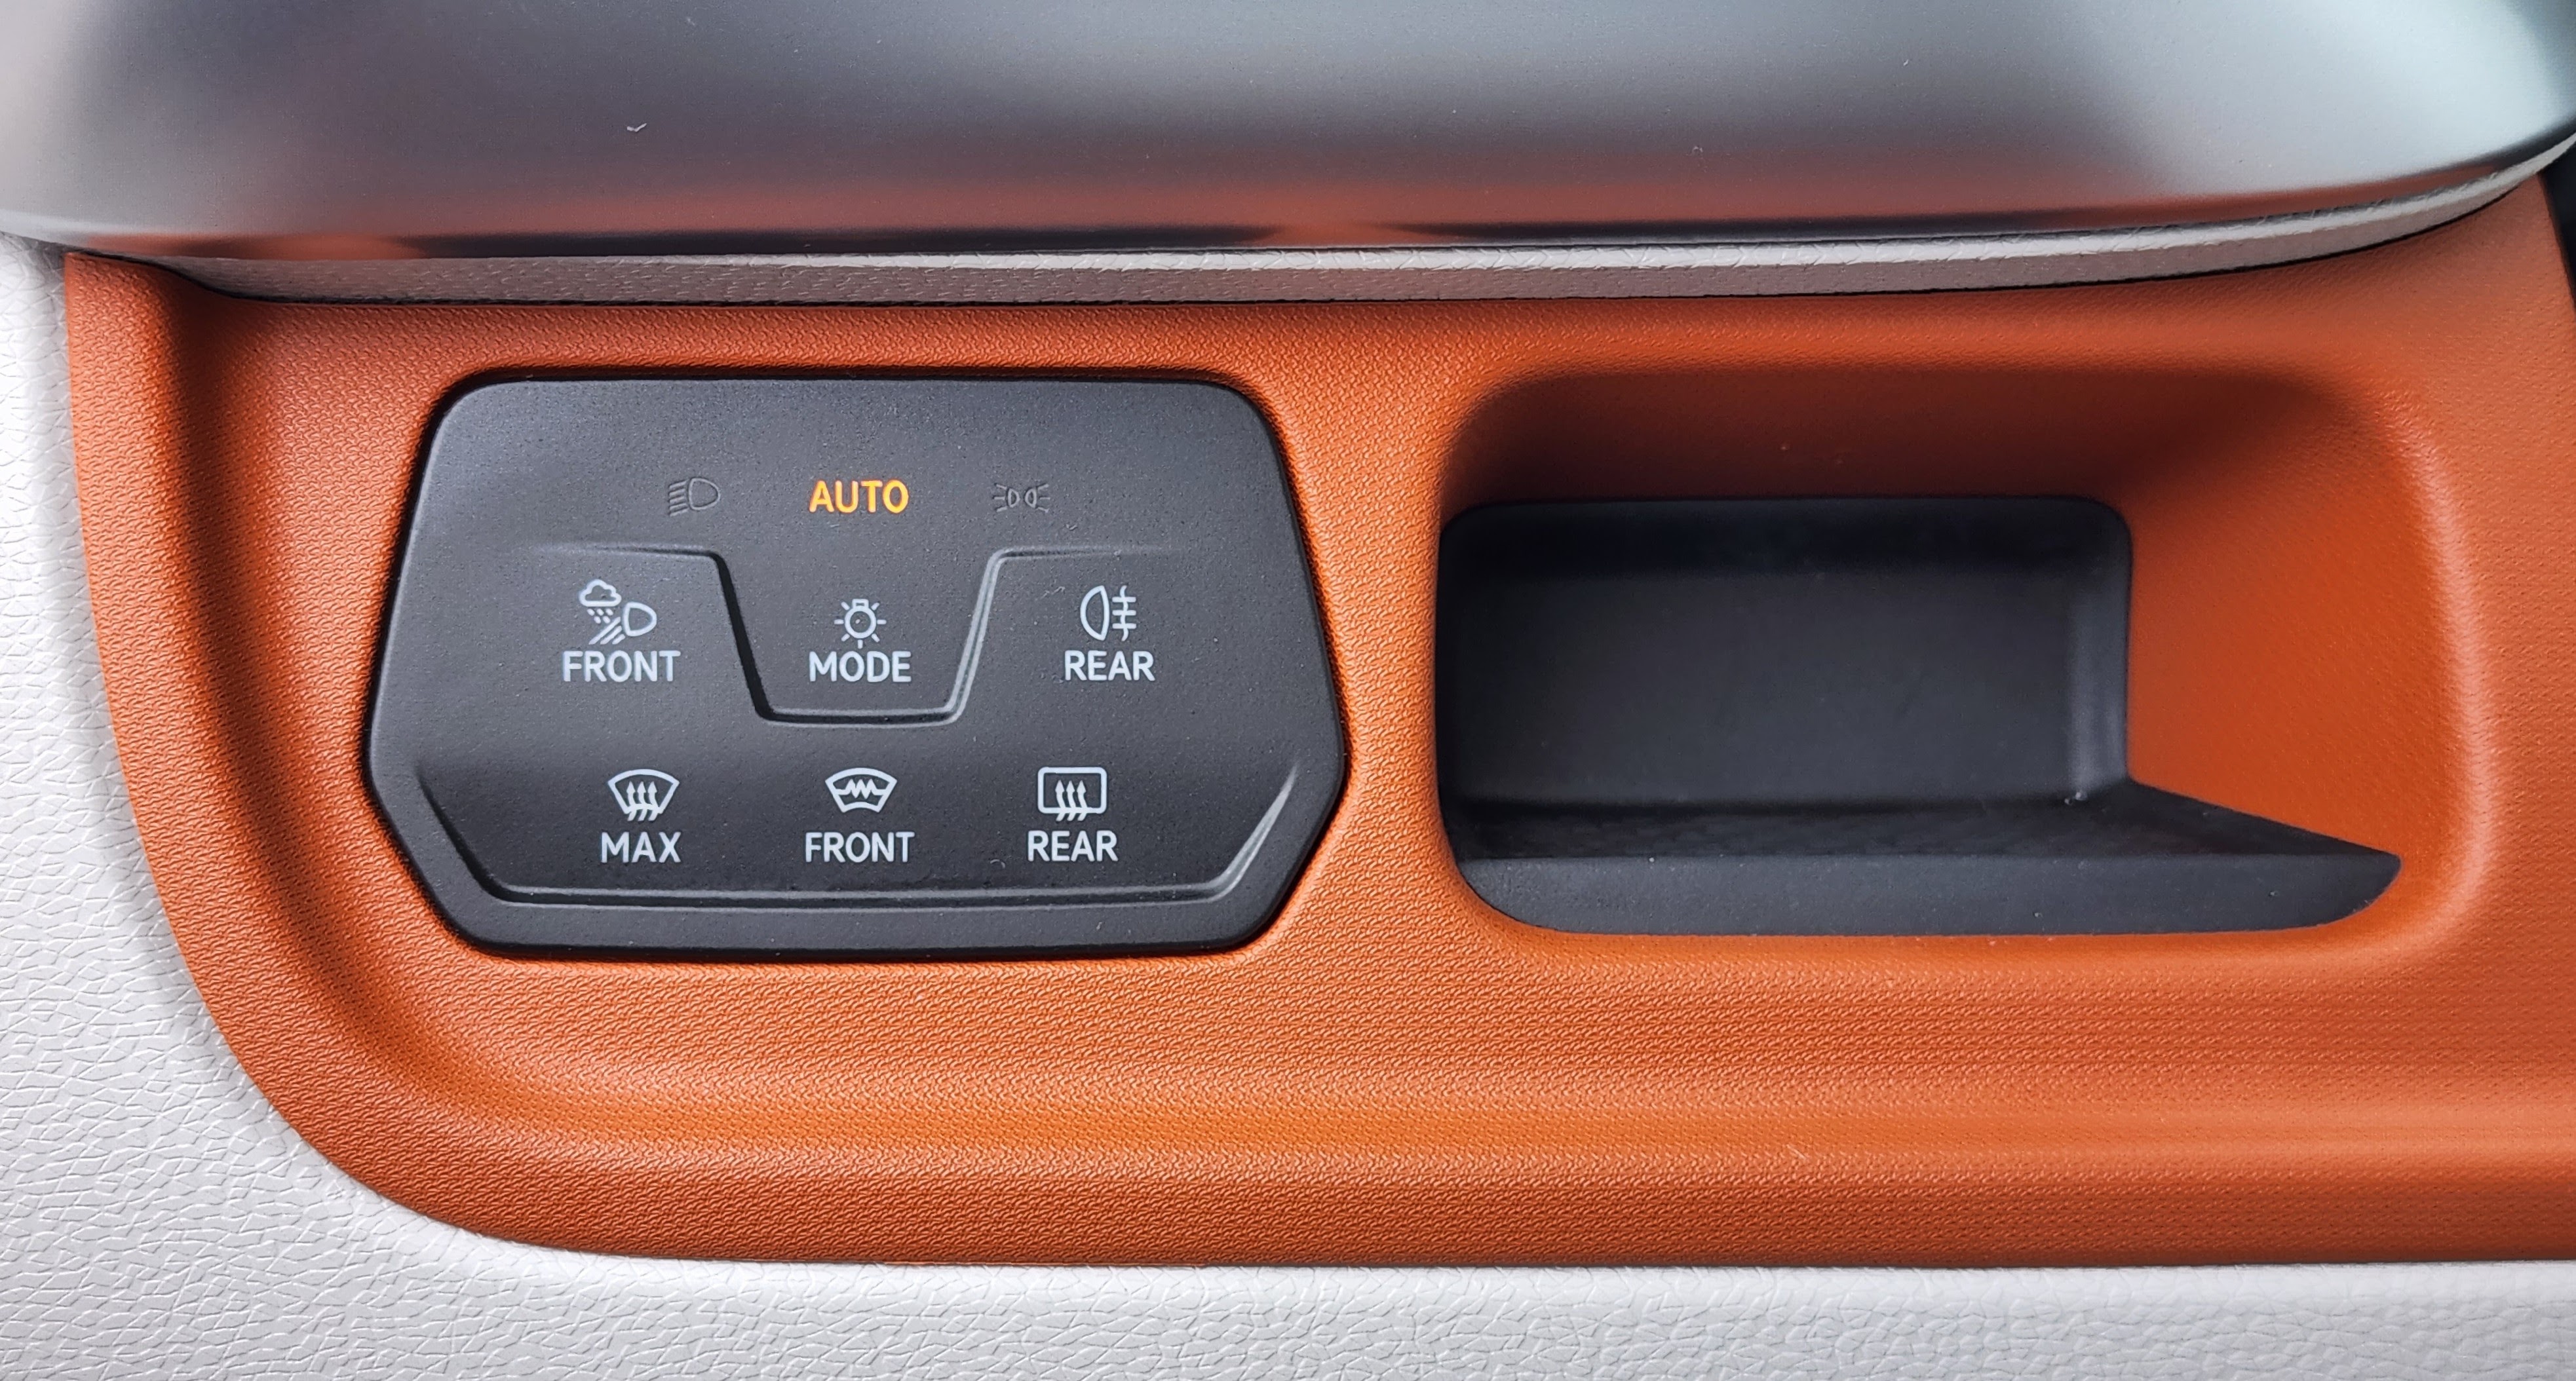 Close-up of buttons to control lights